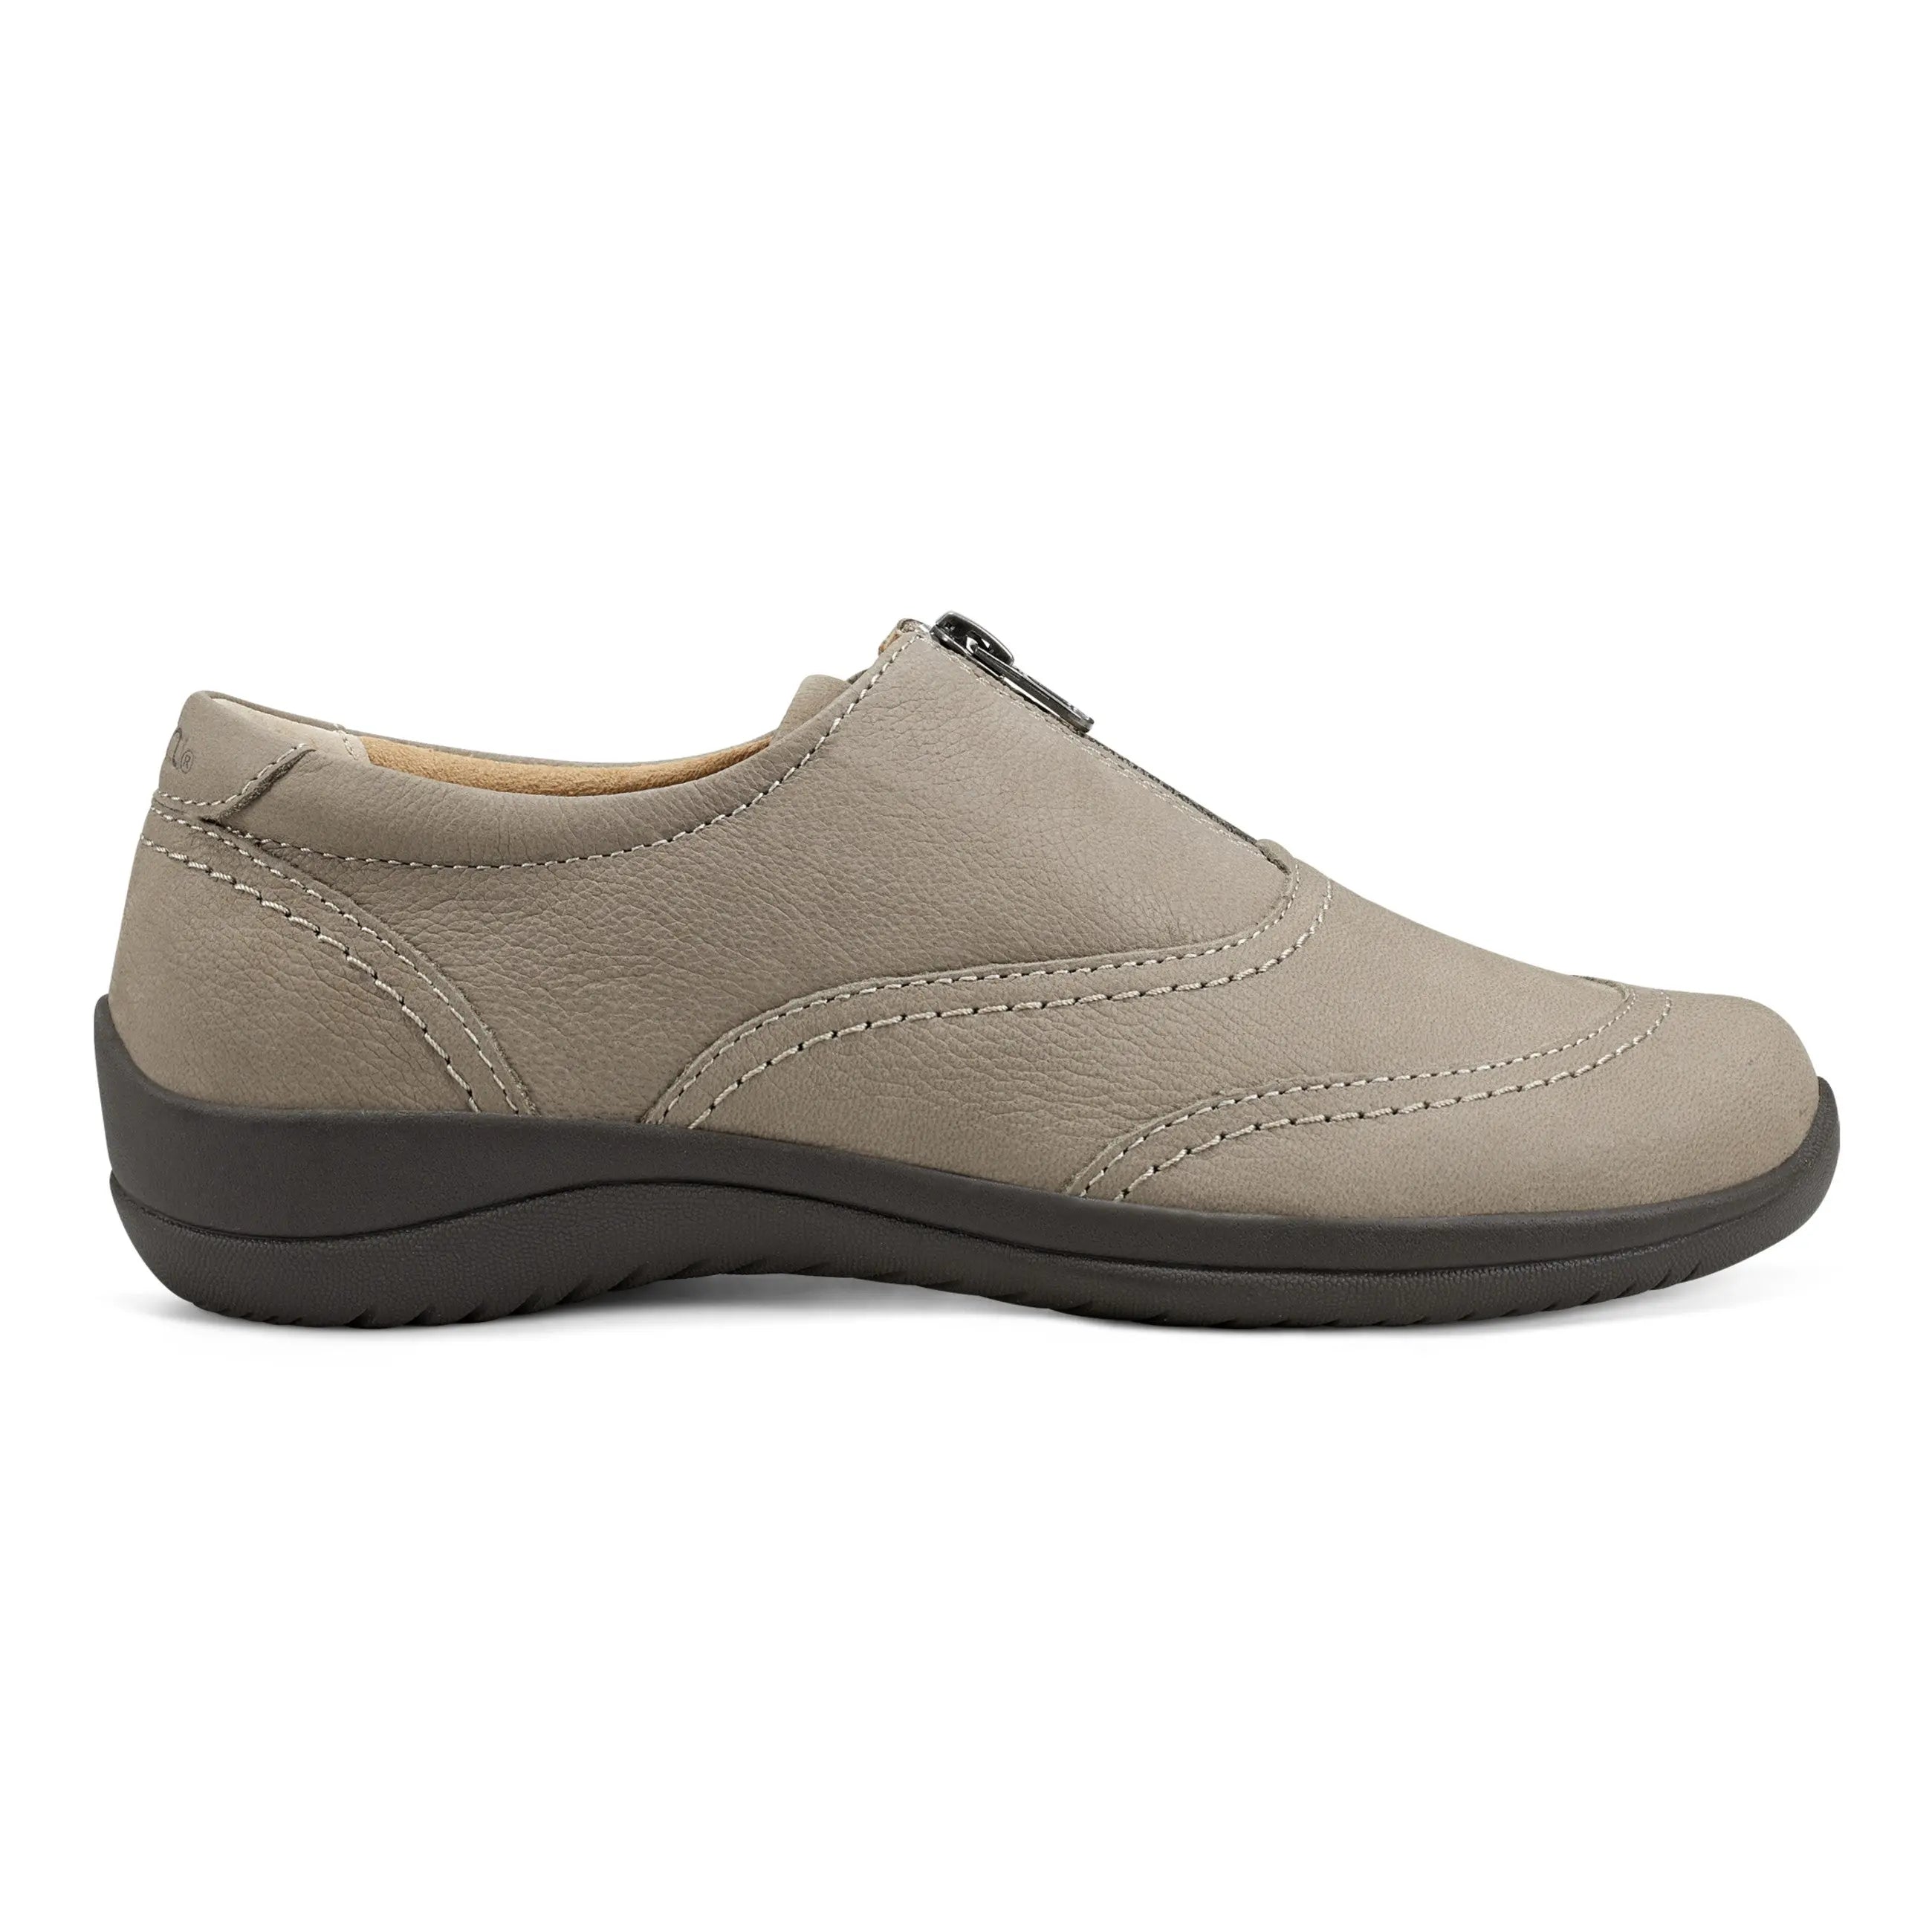 earth® Fannie Round Toe Casual Slip-on Flats – earth® shoes